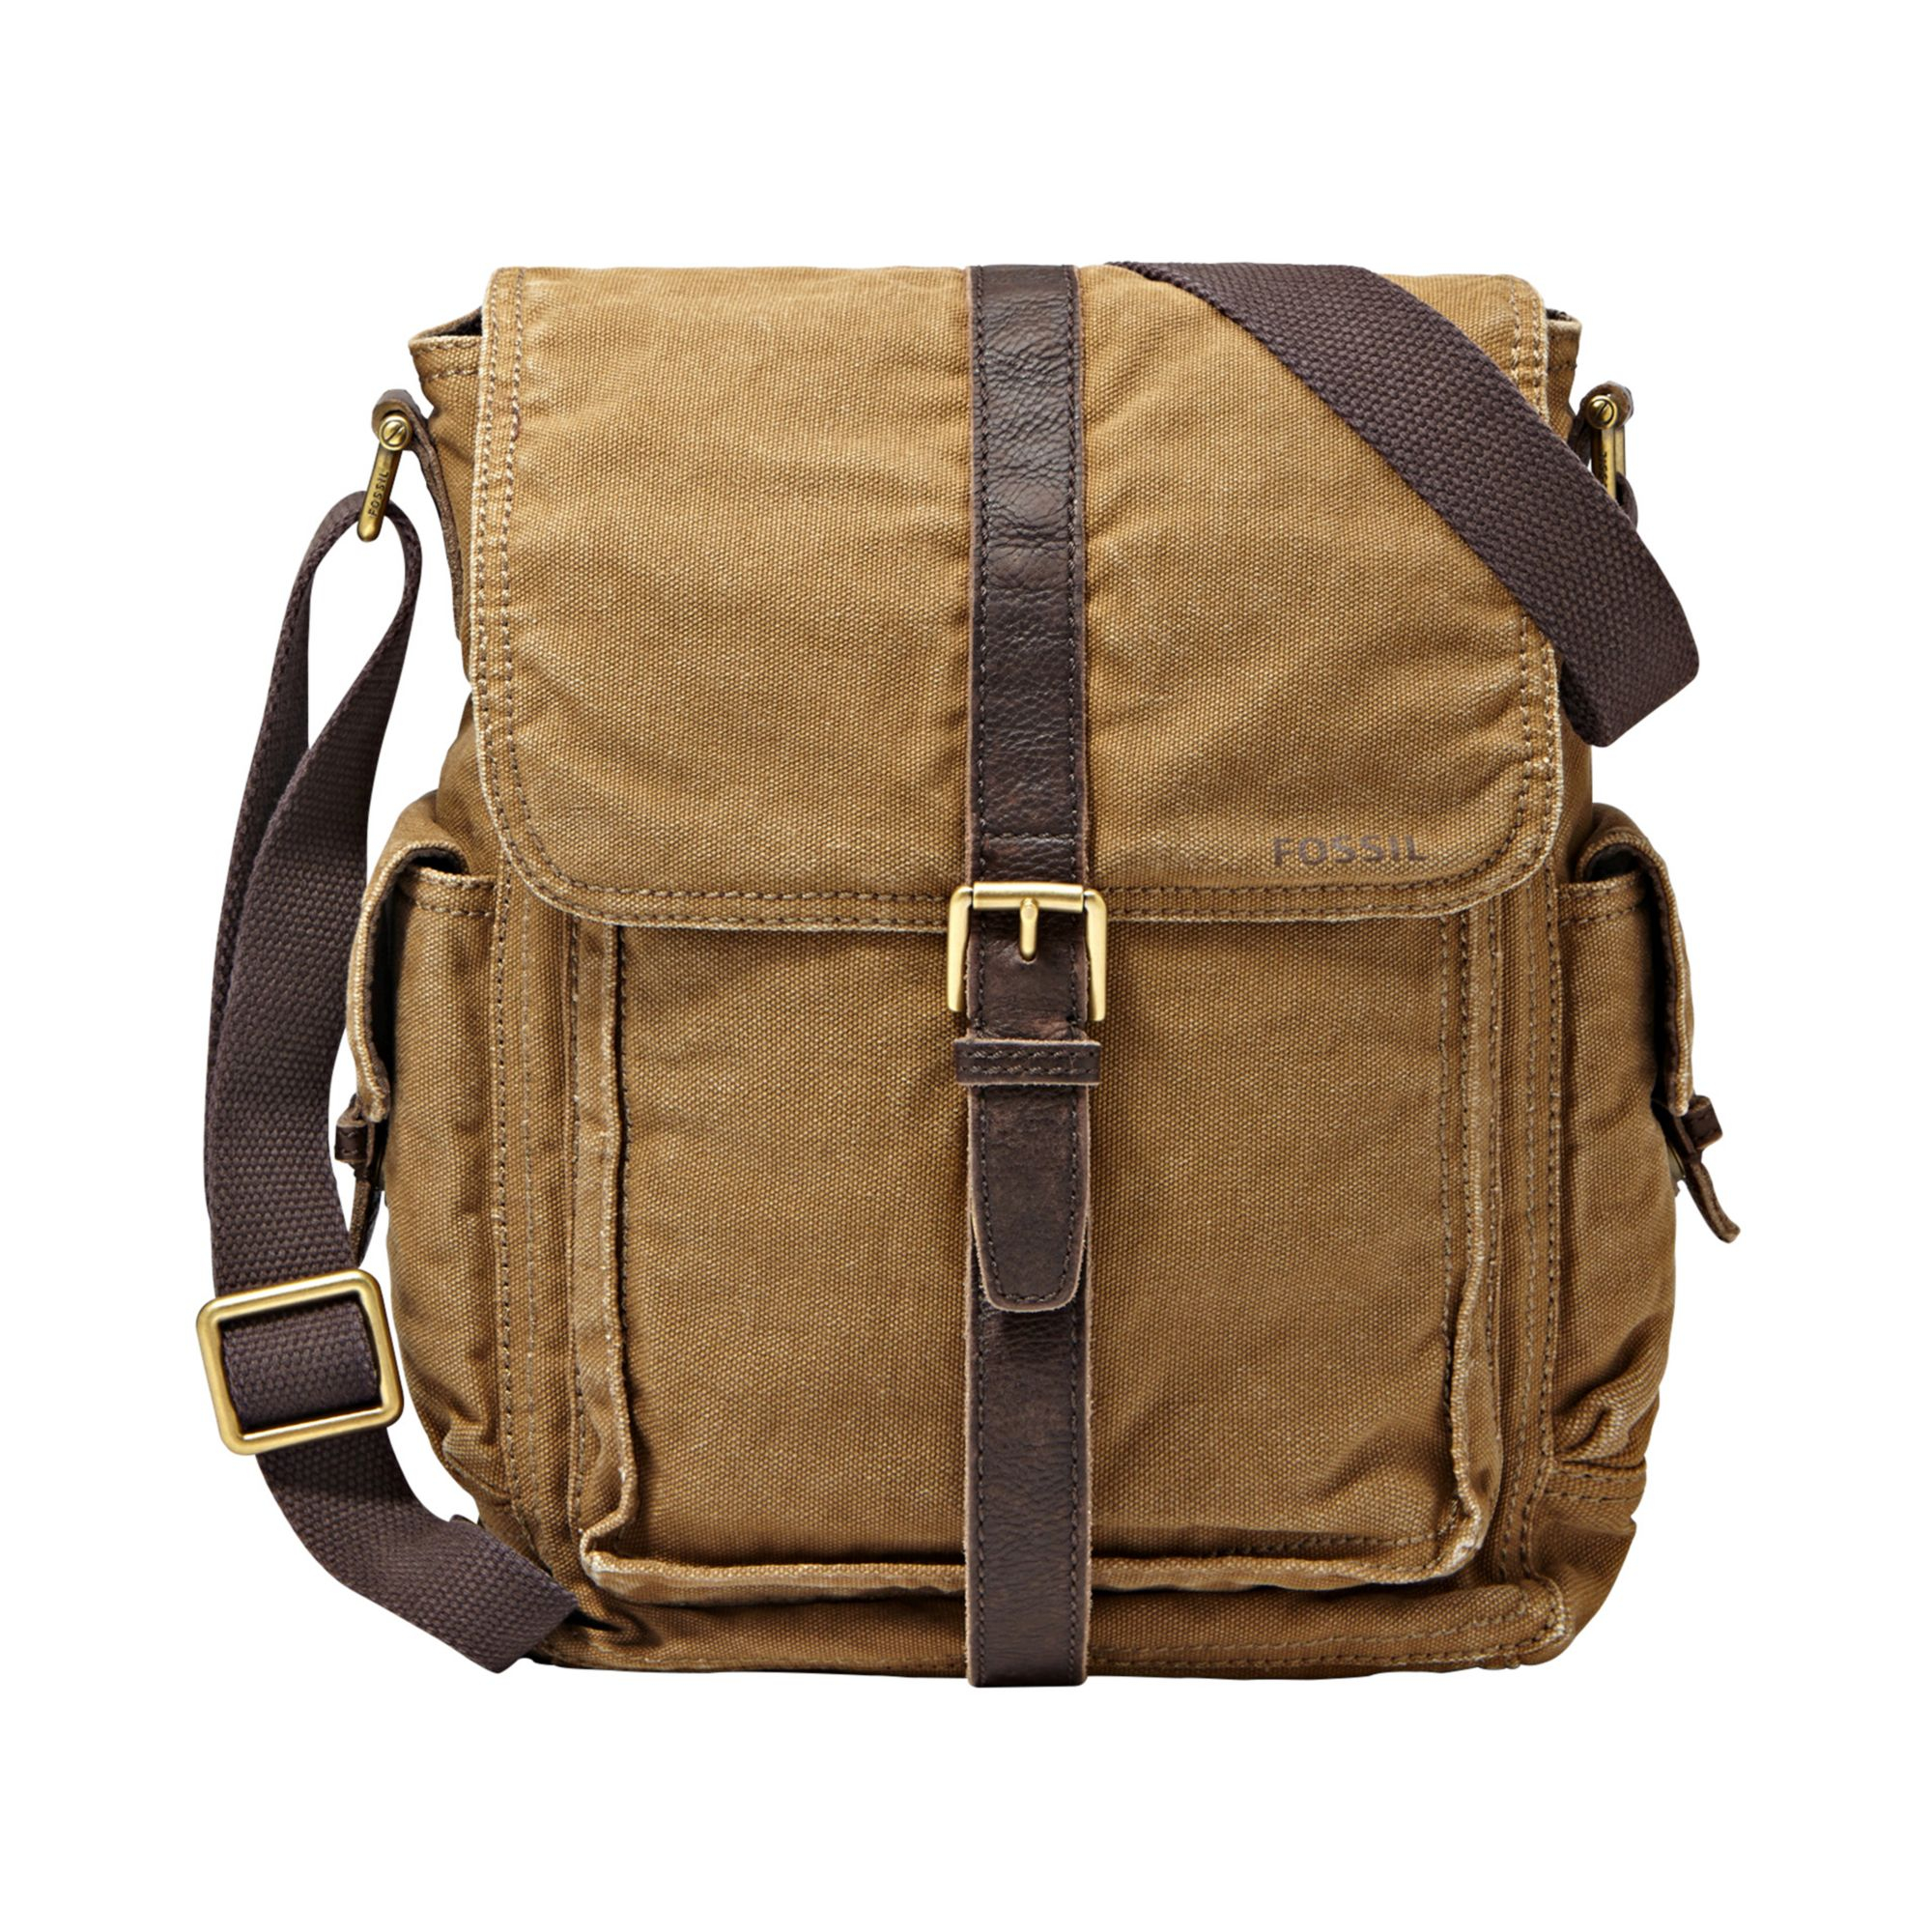 Fossil Estate Casual Cotton Canvas North-South Commuter Bag in Khaki for Men | Lyst